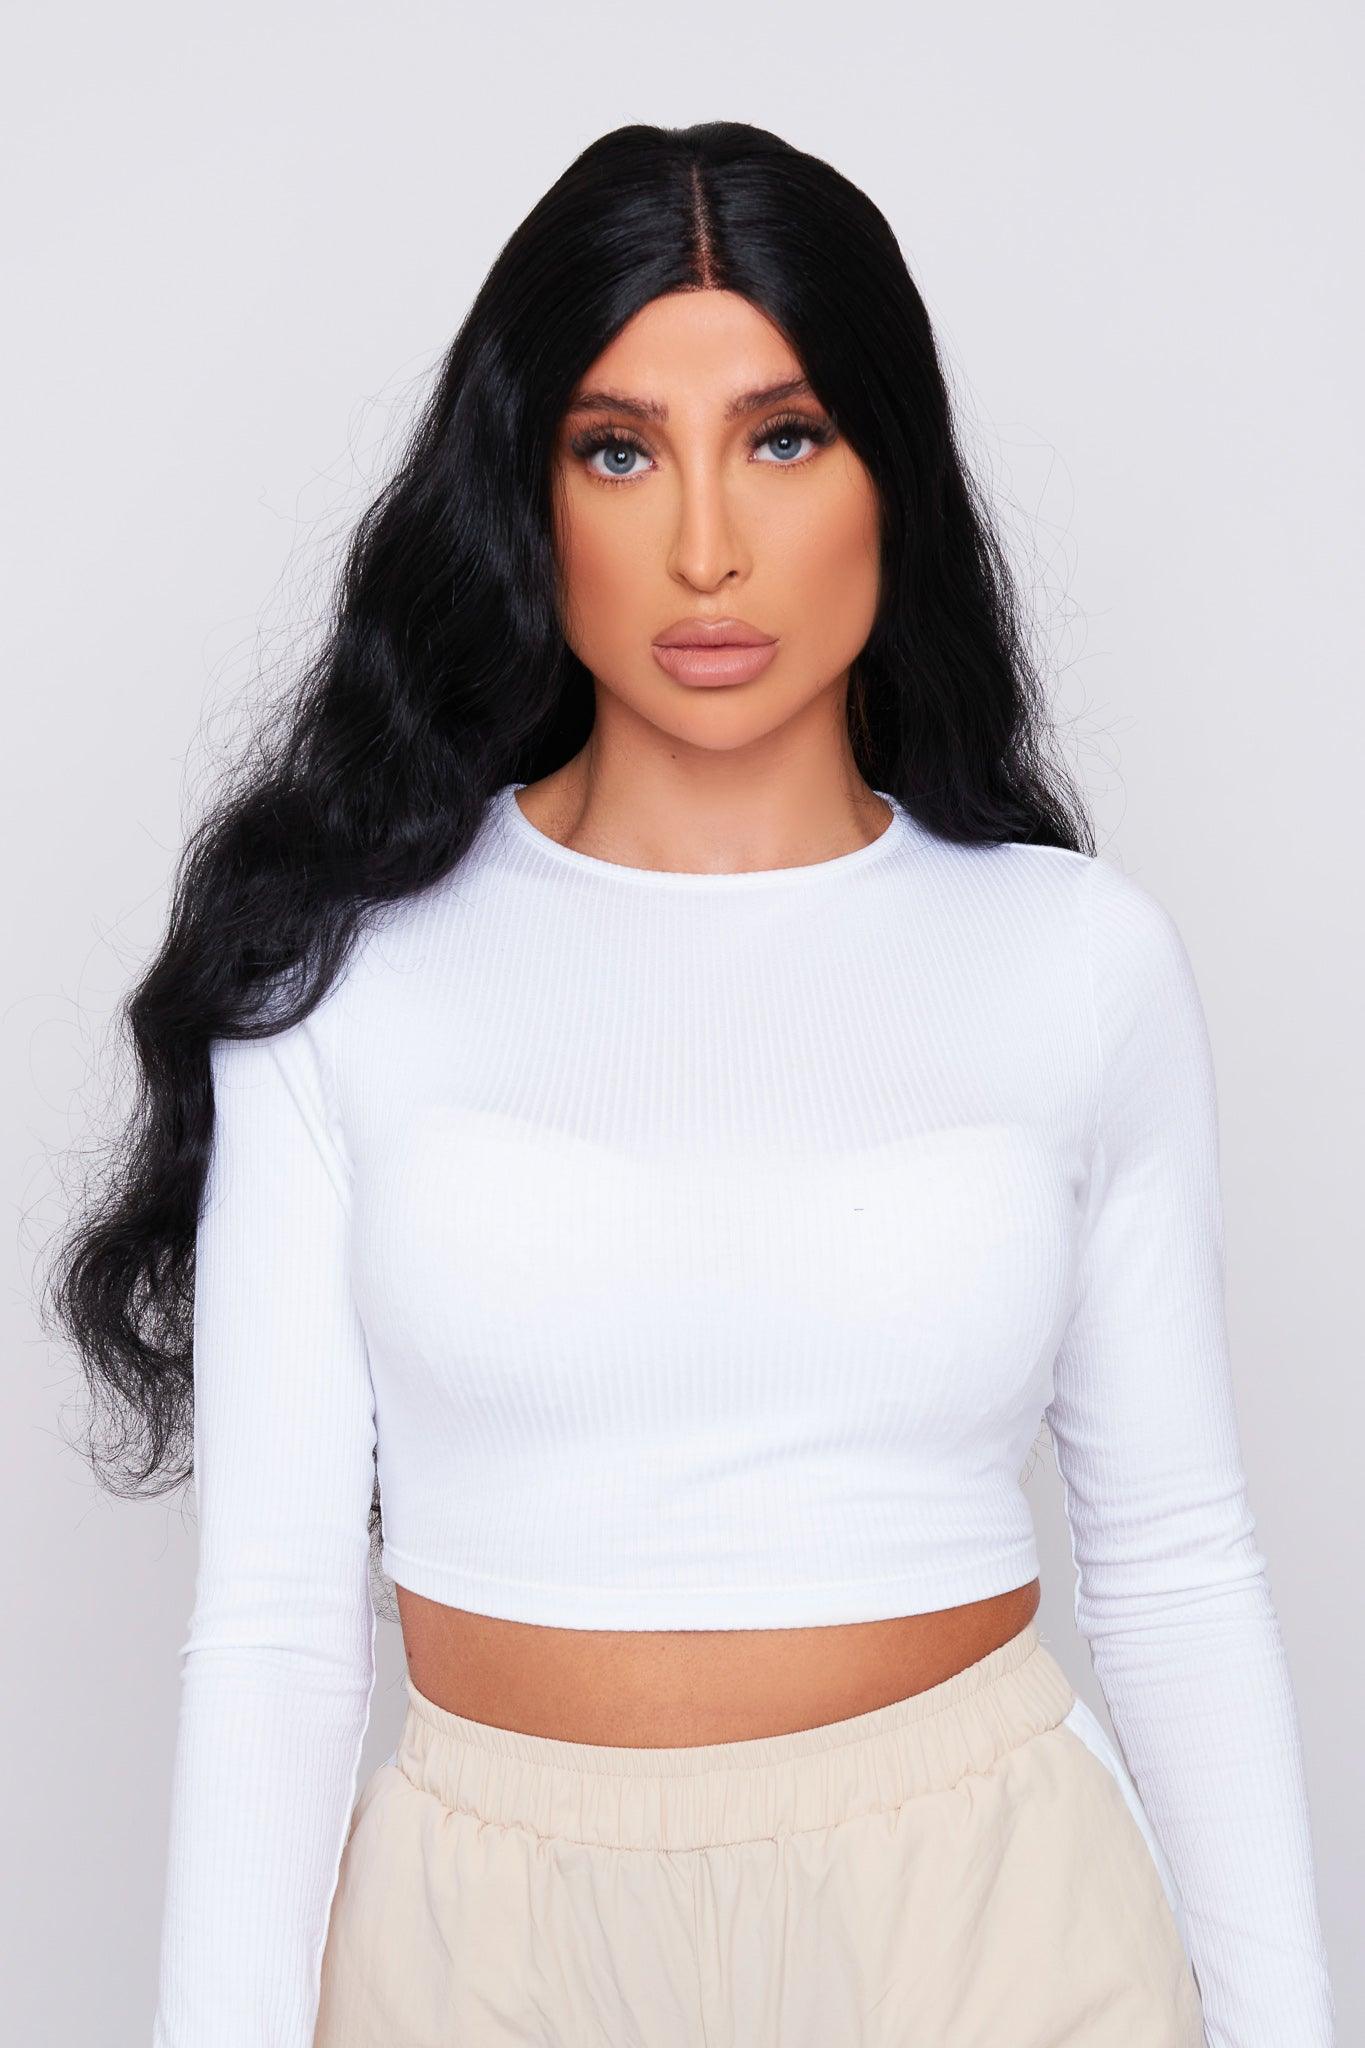 synthetic hair wig